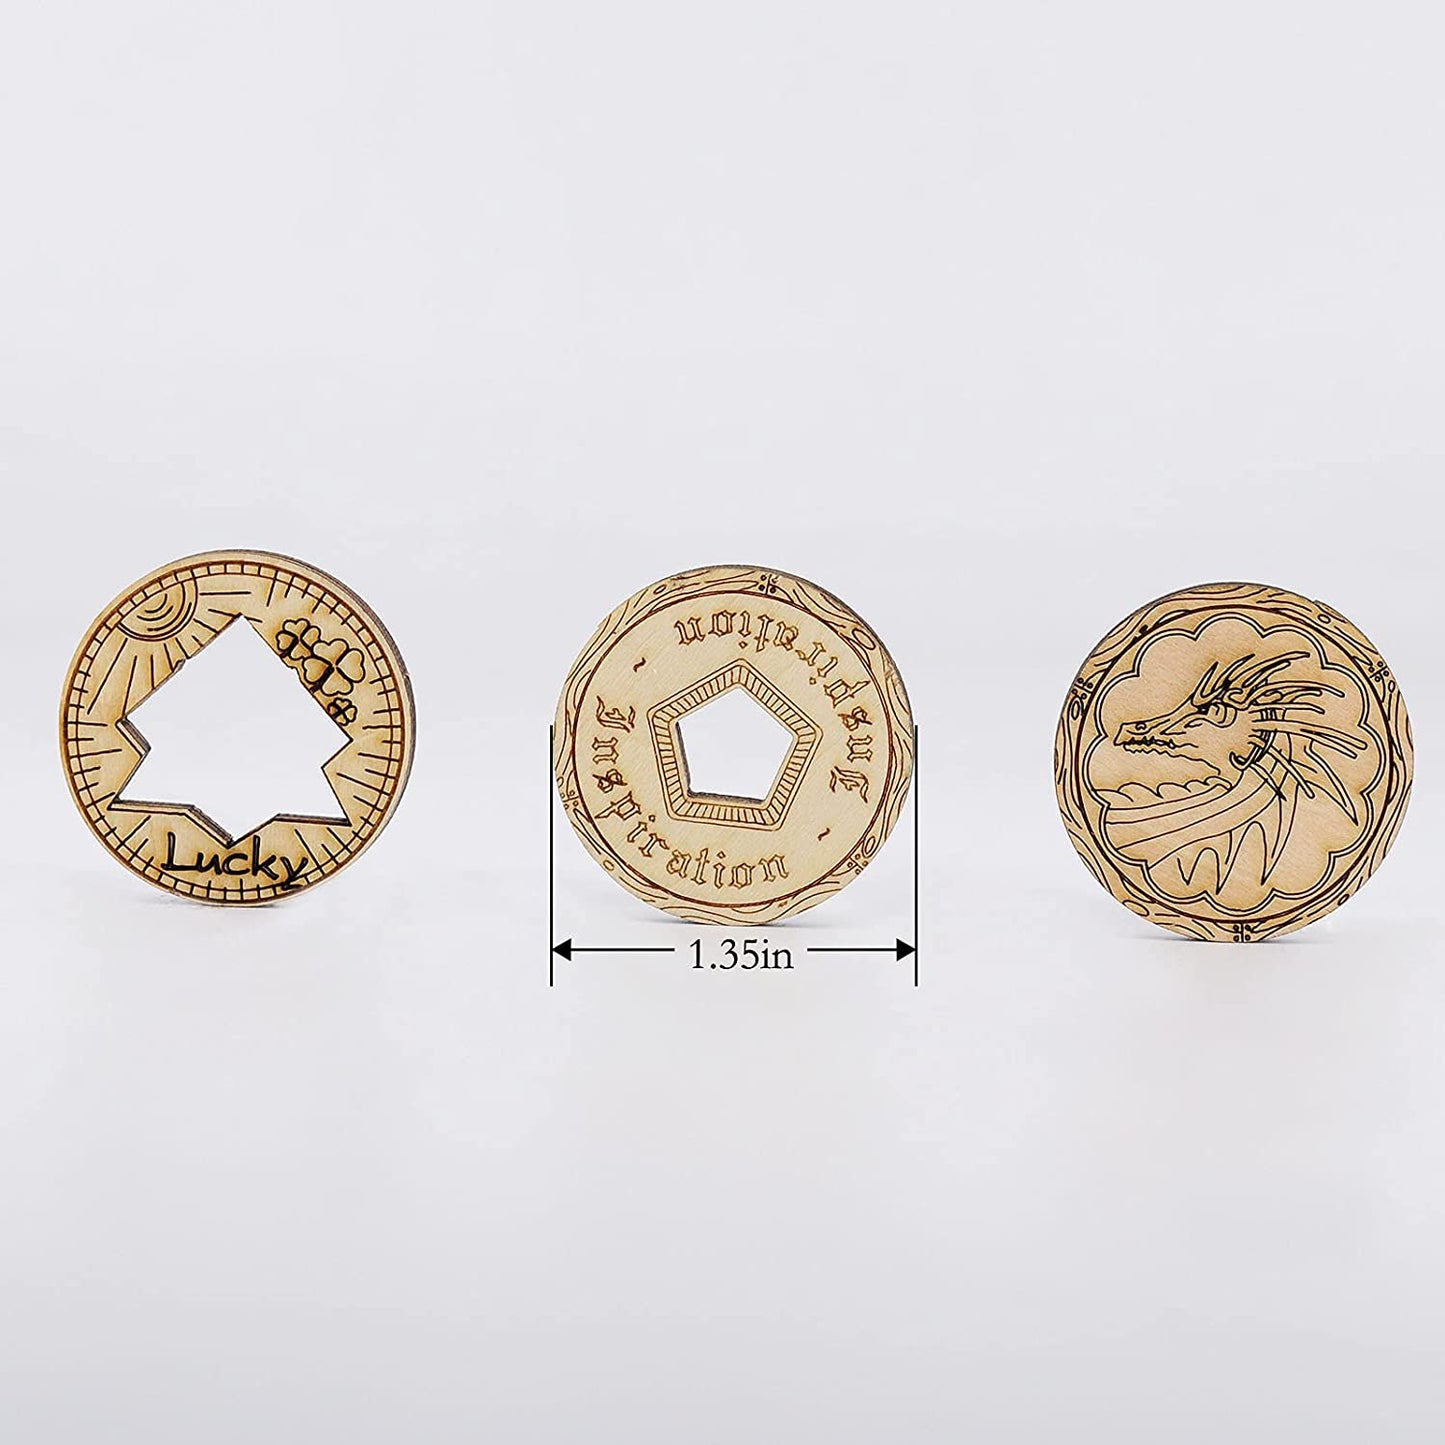 Inspiration Coin Tokens - Set of 9